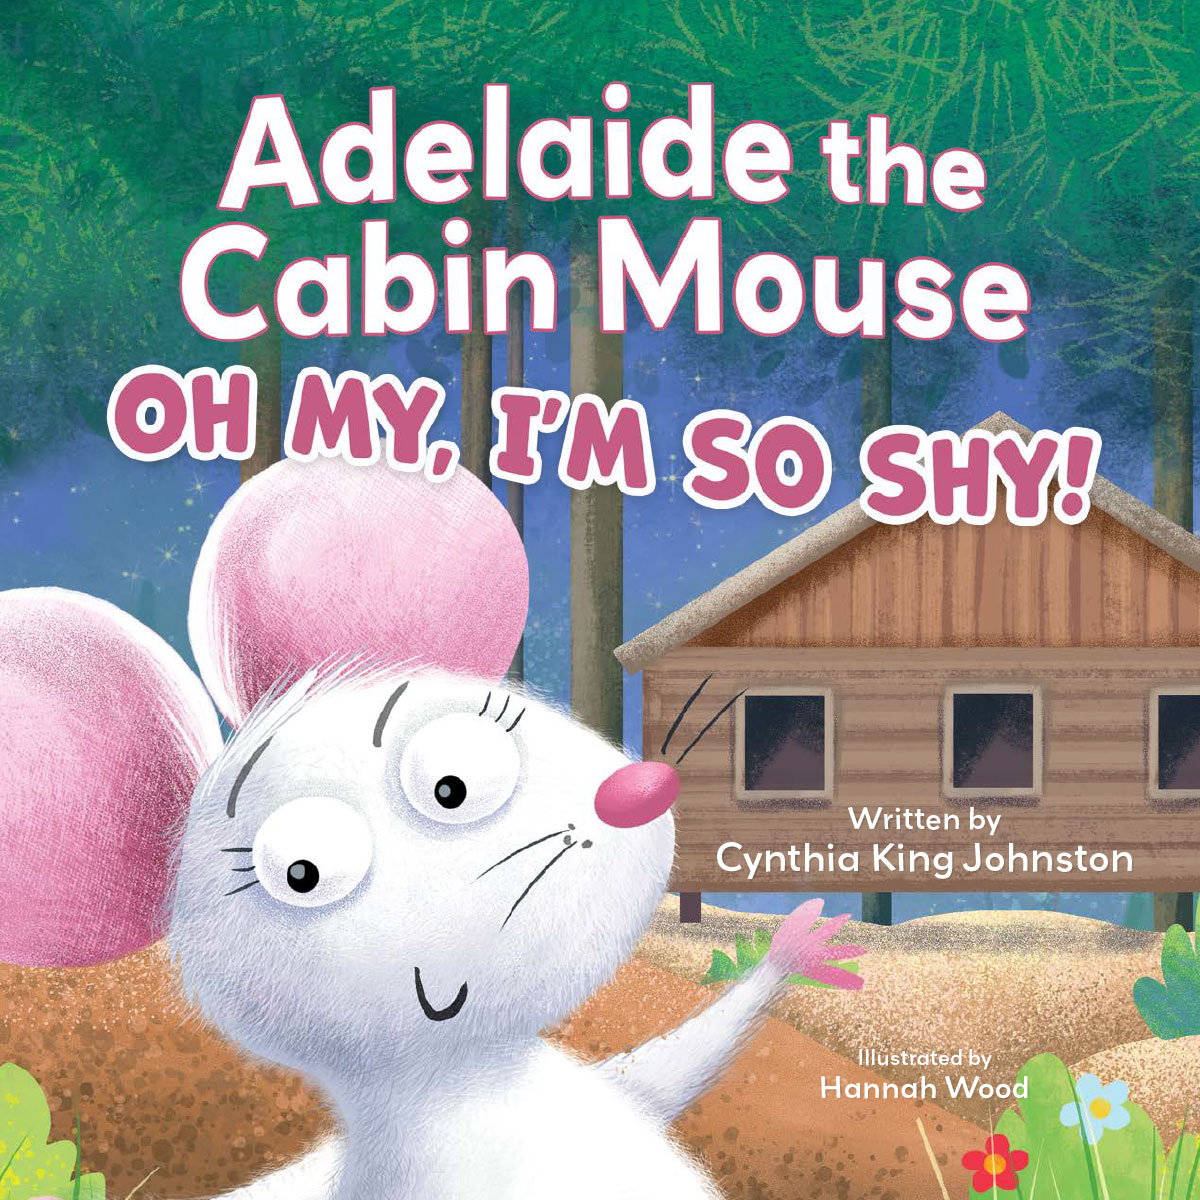 Adelaide the Cabin Mouse: Oh my, I'm so shy! By Cynthia King Johnston Book Cover